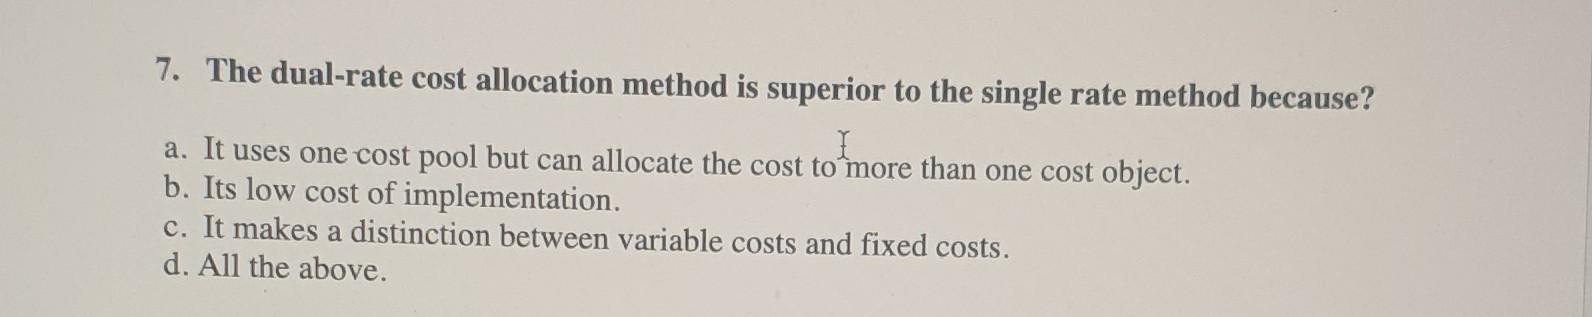 7. The dual-rate cost allocation method is superior to the single rate method because?a. It uses one cost pool but can alloc